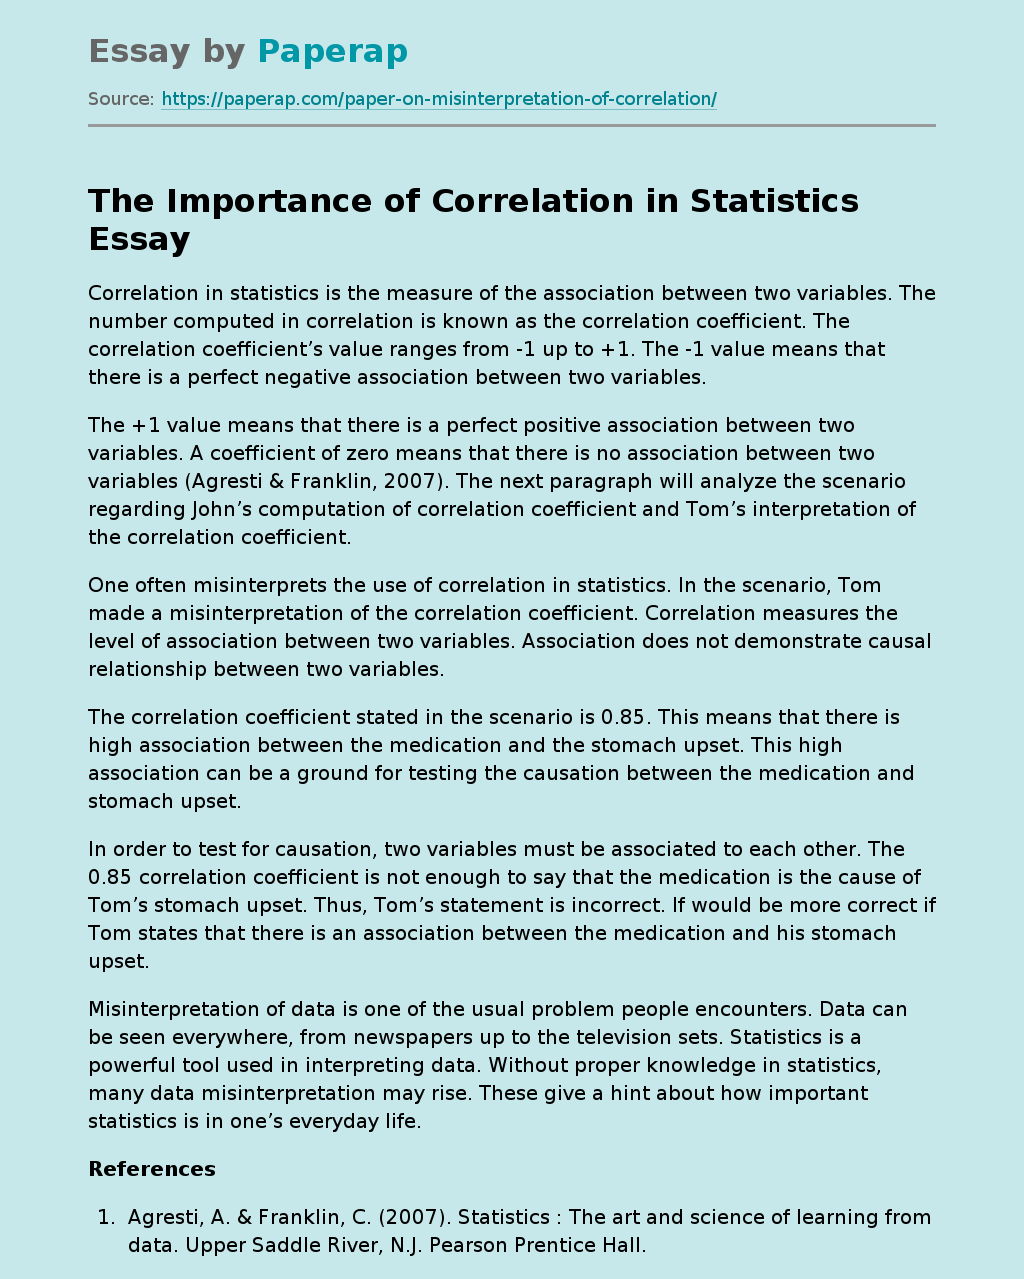 The Importance of Correlation in Statistics